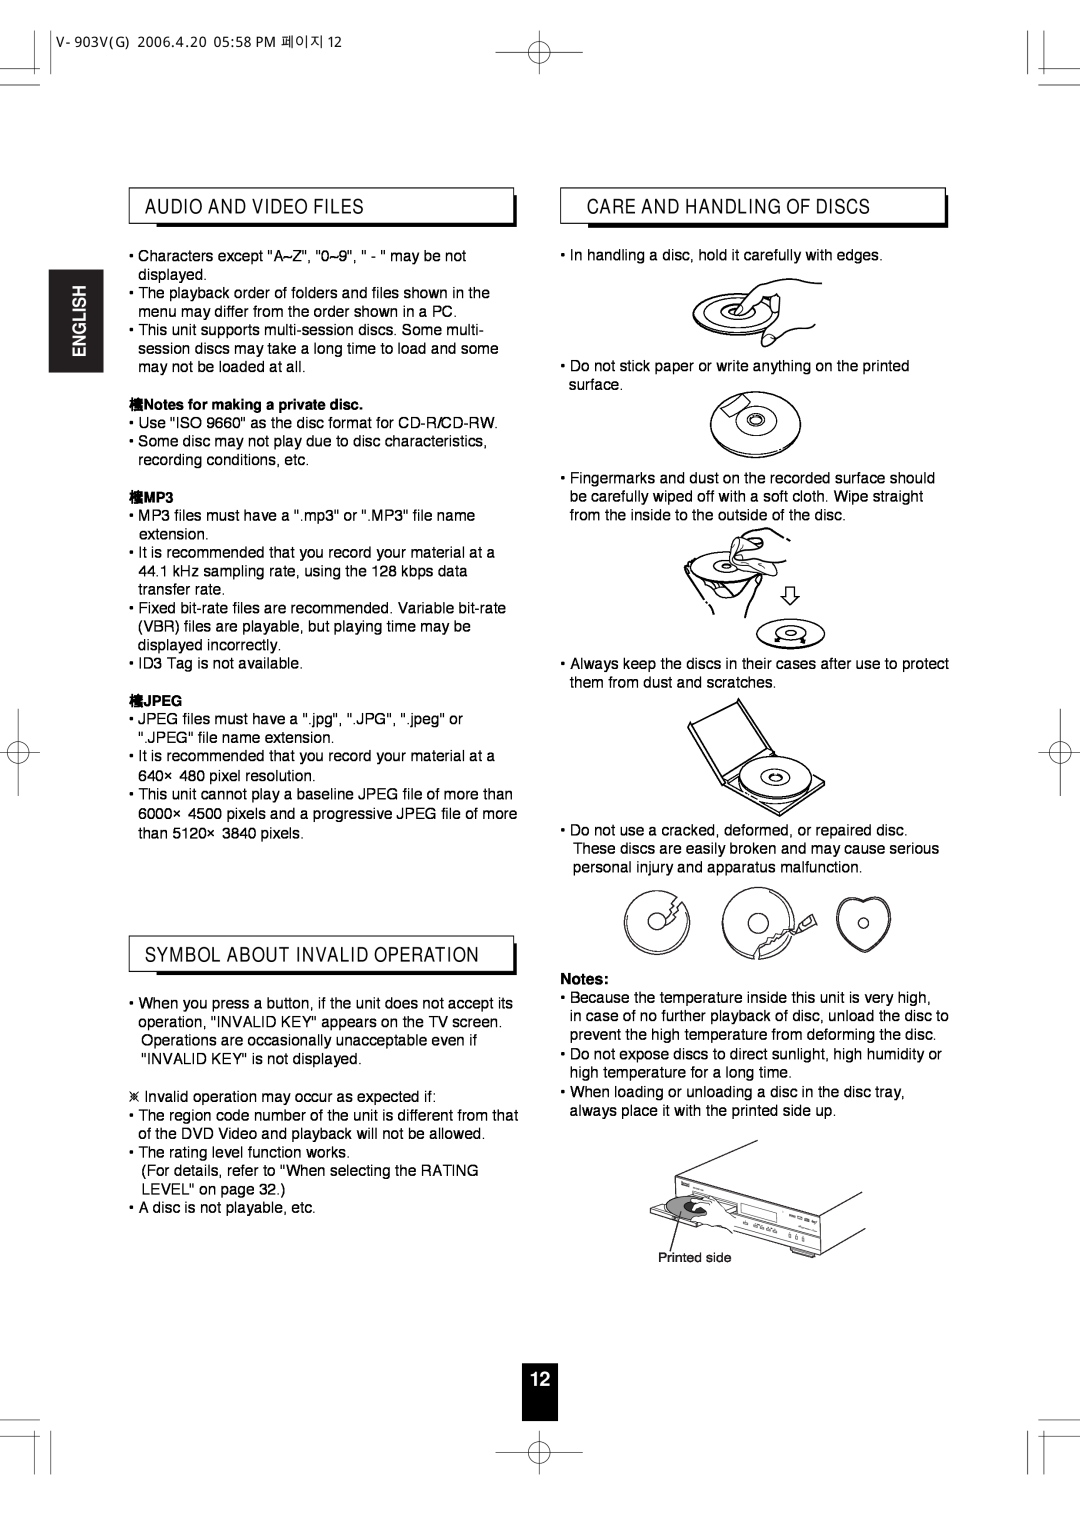 Sherwood V-903 manual Audio And Video Files, Care And Handling Of Discs, Symbol About Invalid Operation, English, Jpeg 